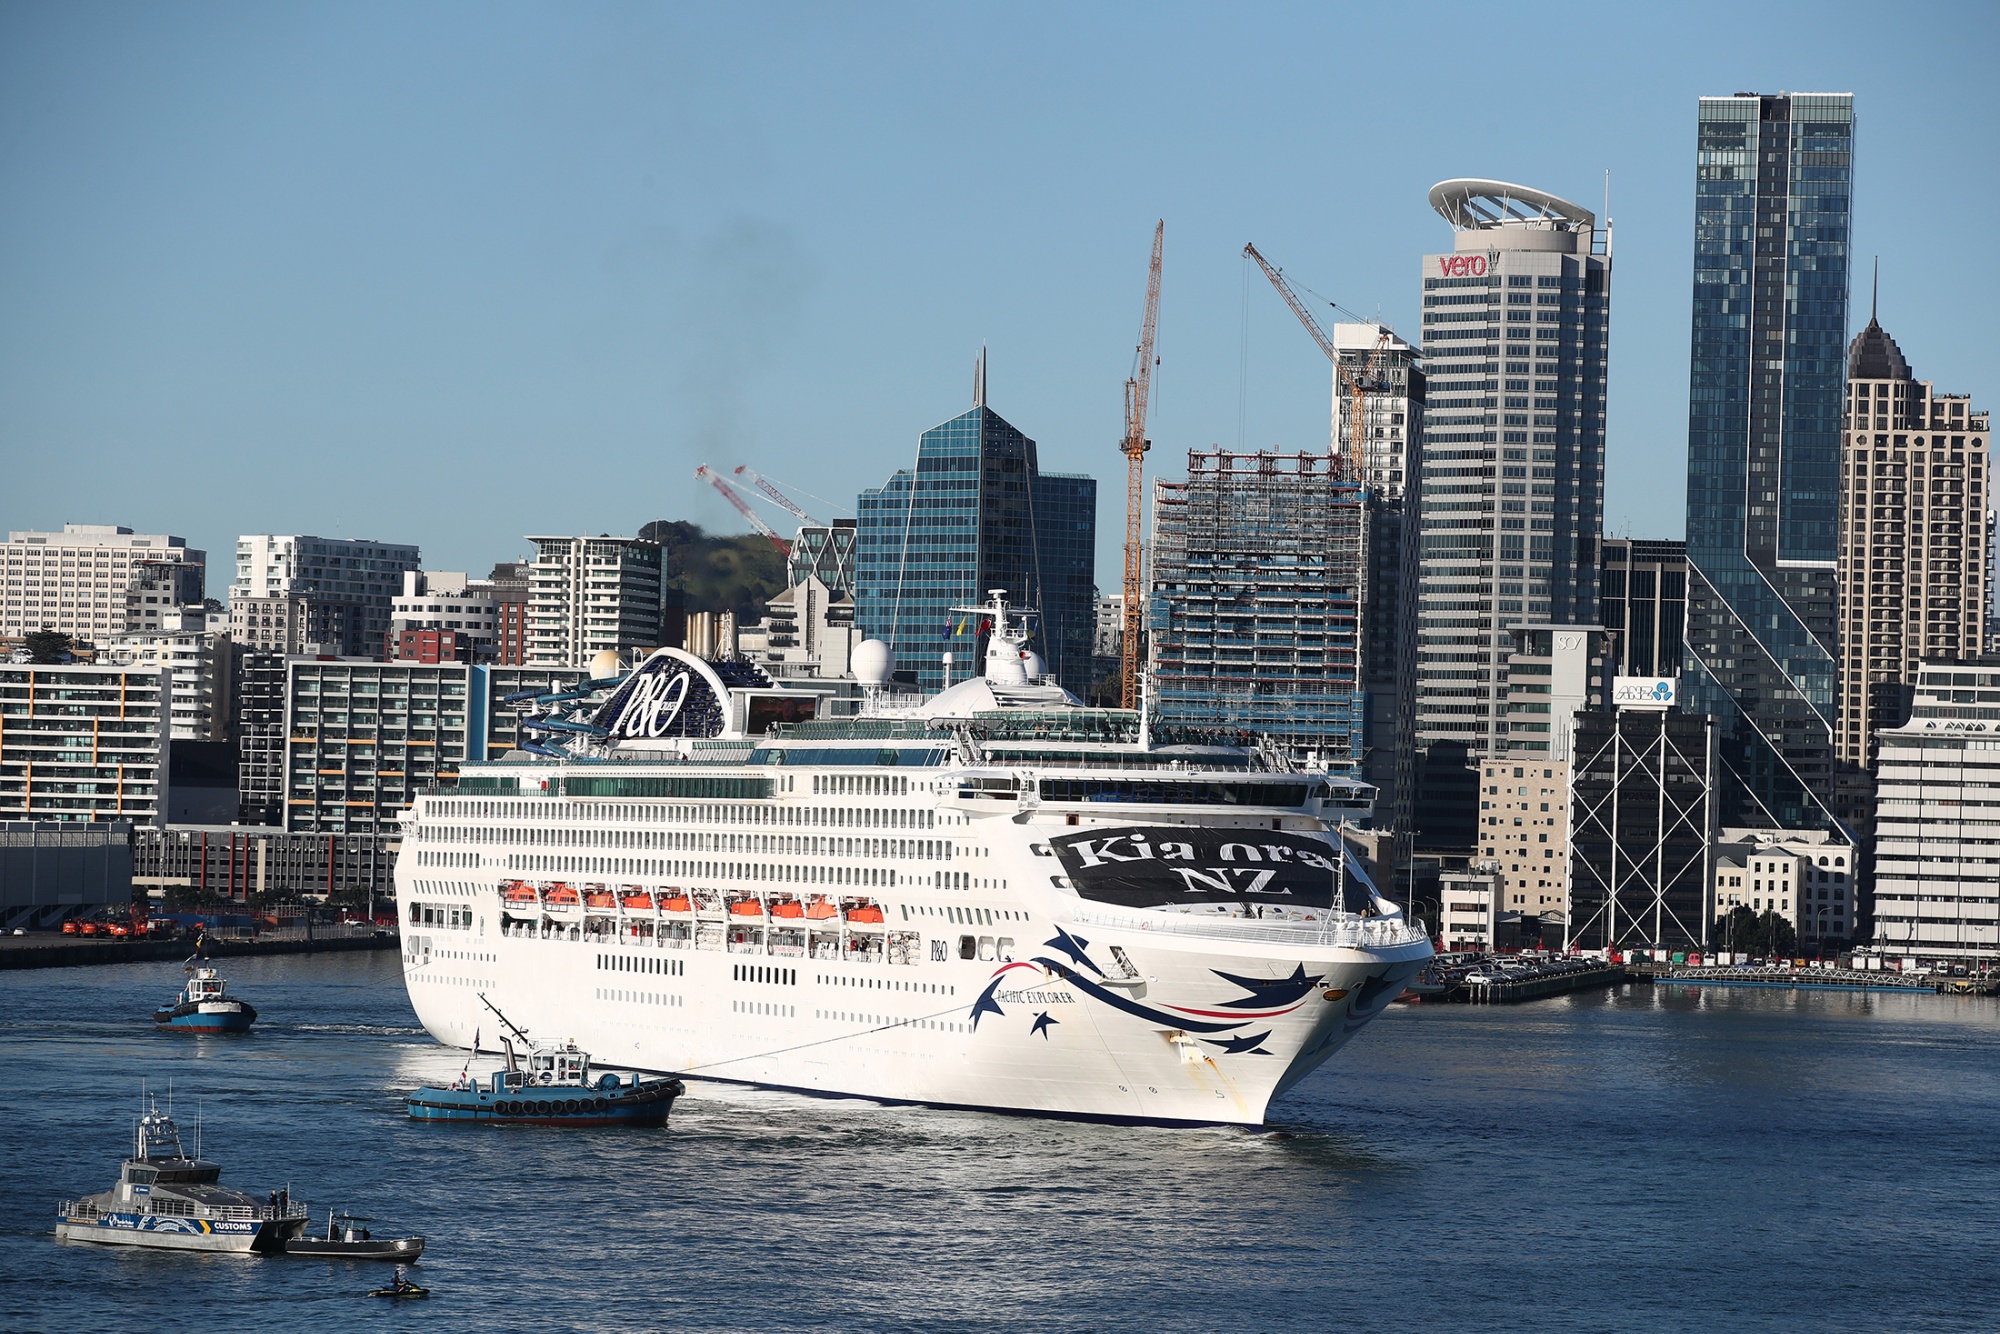 cruise ships in nz today